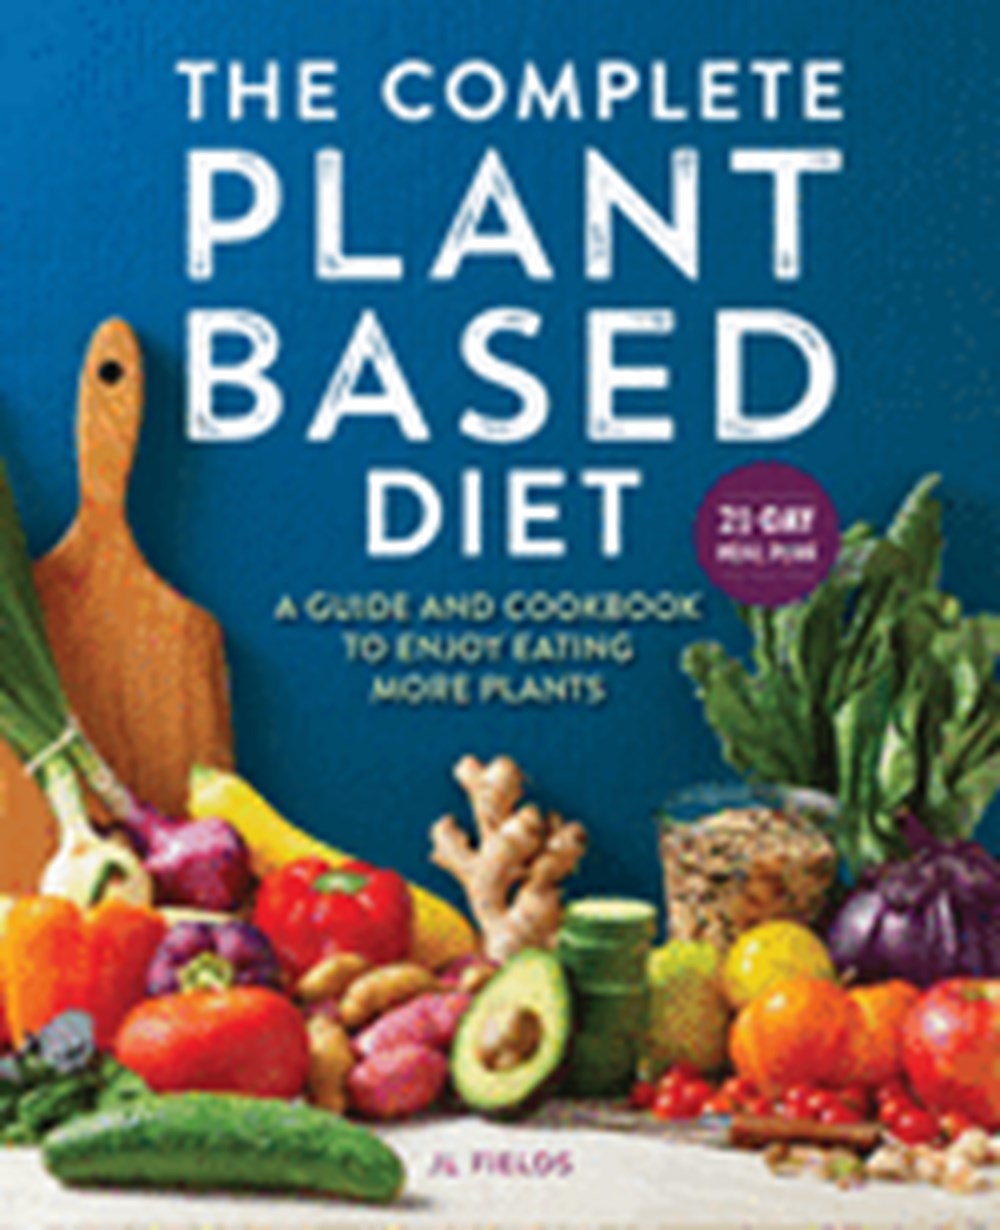 The Complete Plant Based Diet in Paperback by Jl Fields